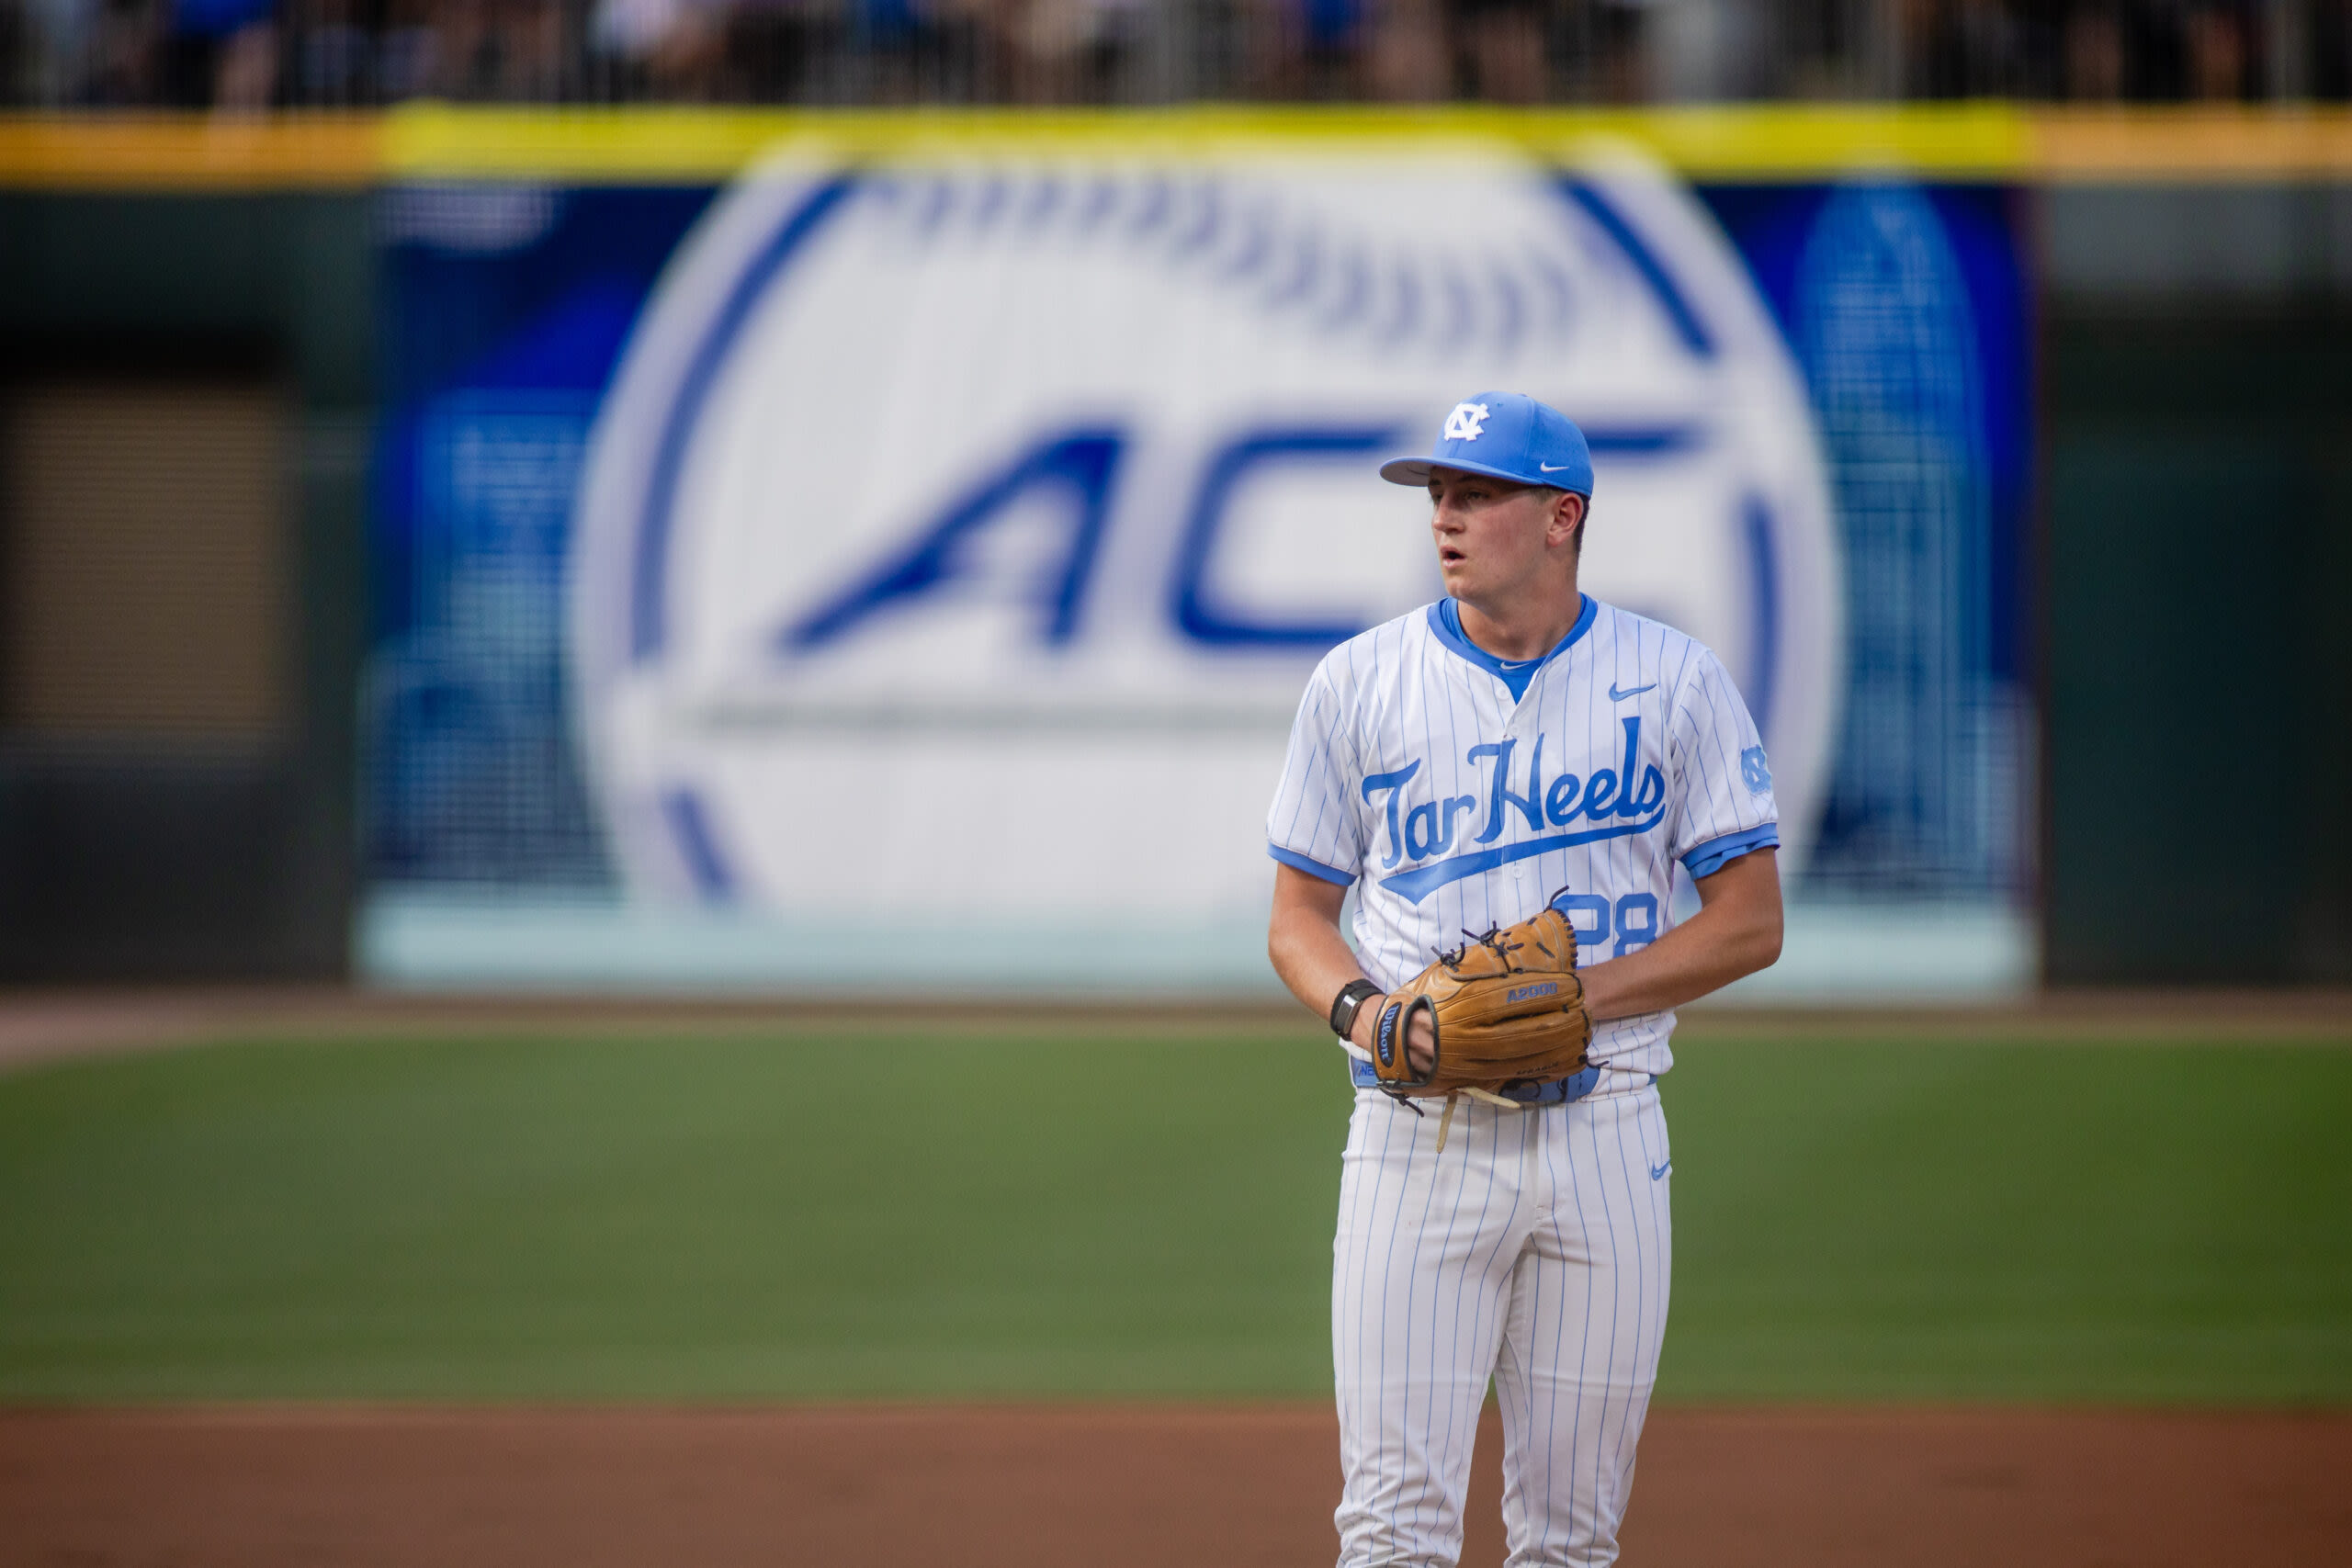 UNC baseball falls short to Wake Forest in a classic for the ages